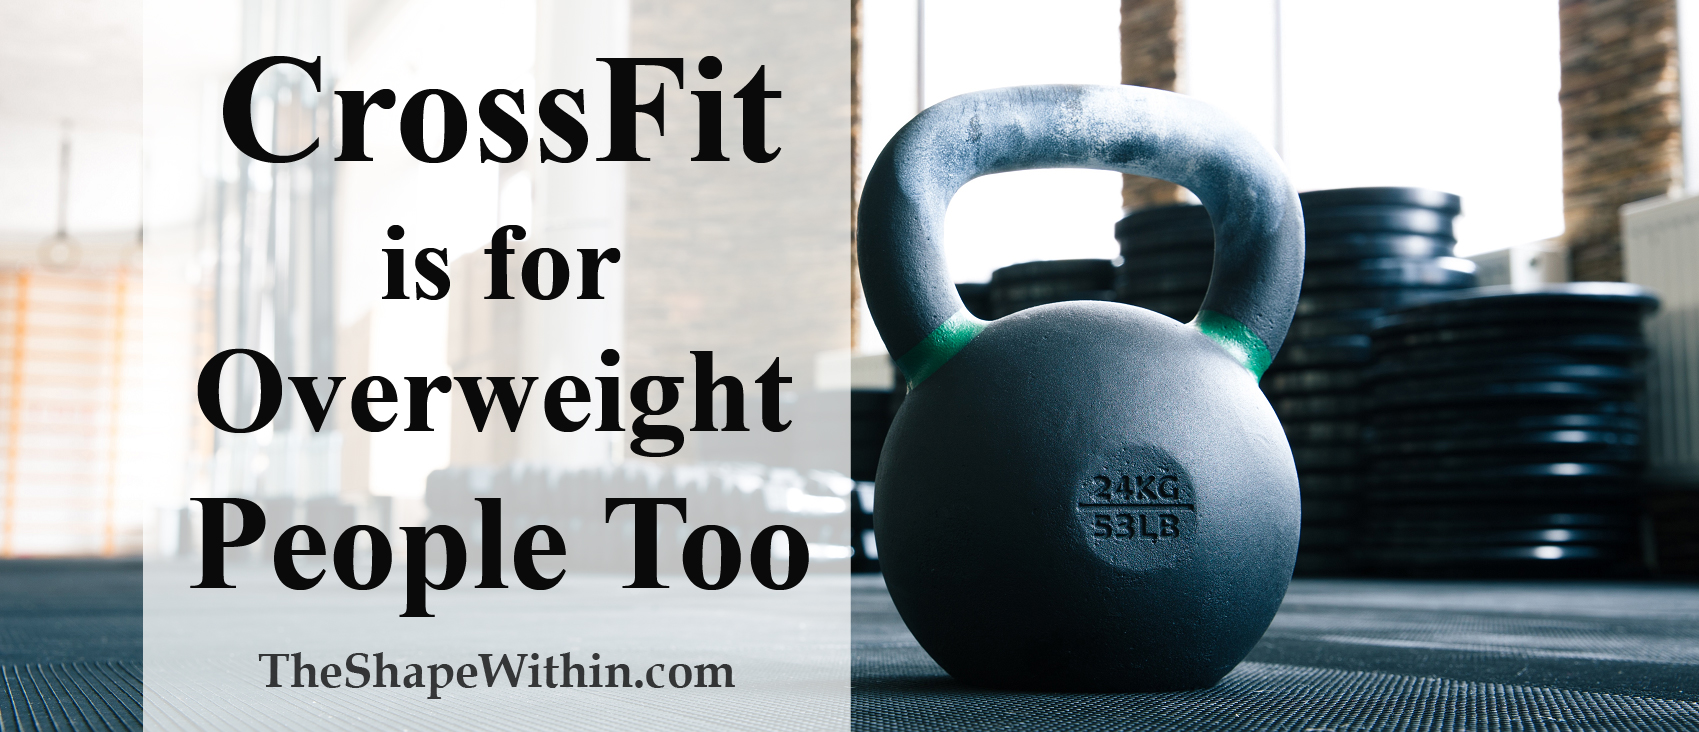 A lot of people assume that CrossFit is just for people who are already in great shape, but it's great for overweight people as well.